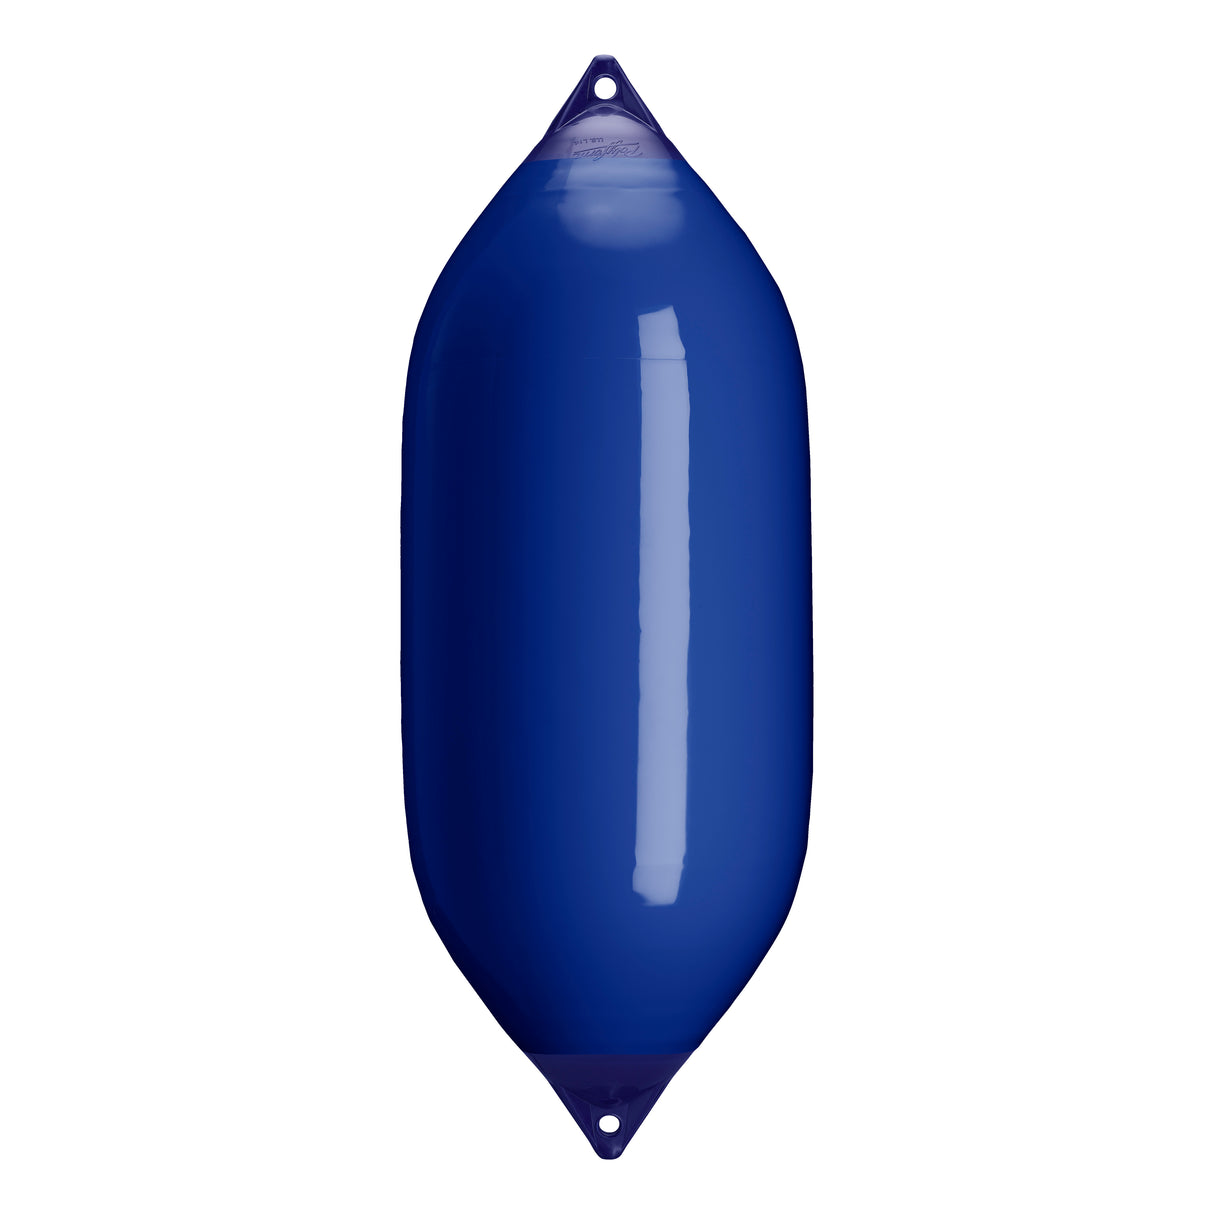 Cobalt Blue boat fender with Navy-Top, Polyform F-11 